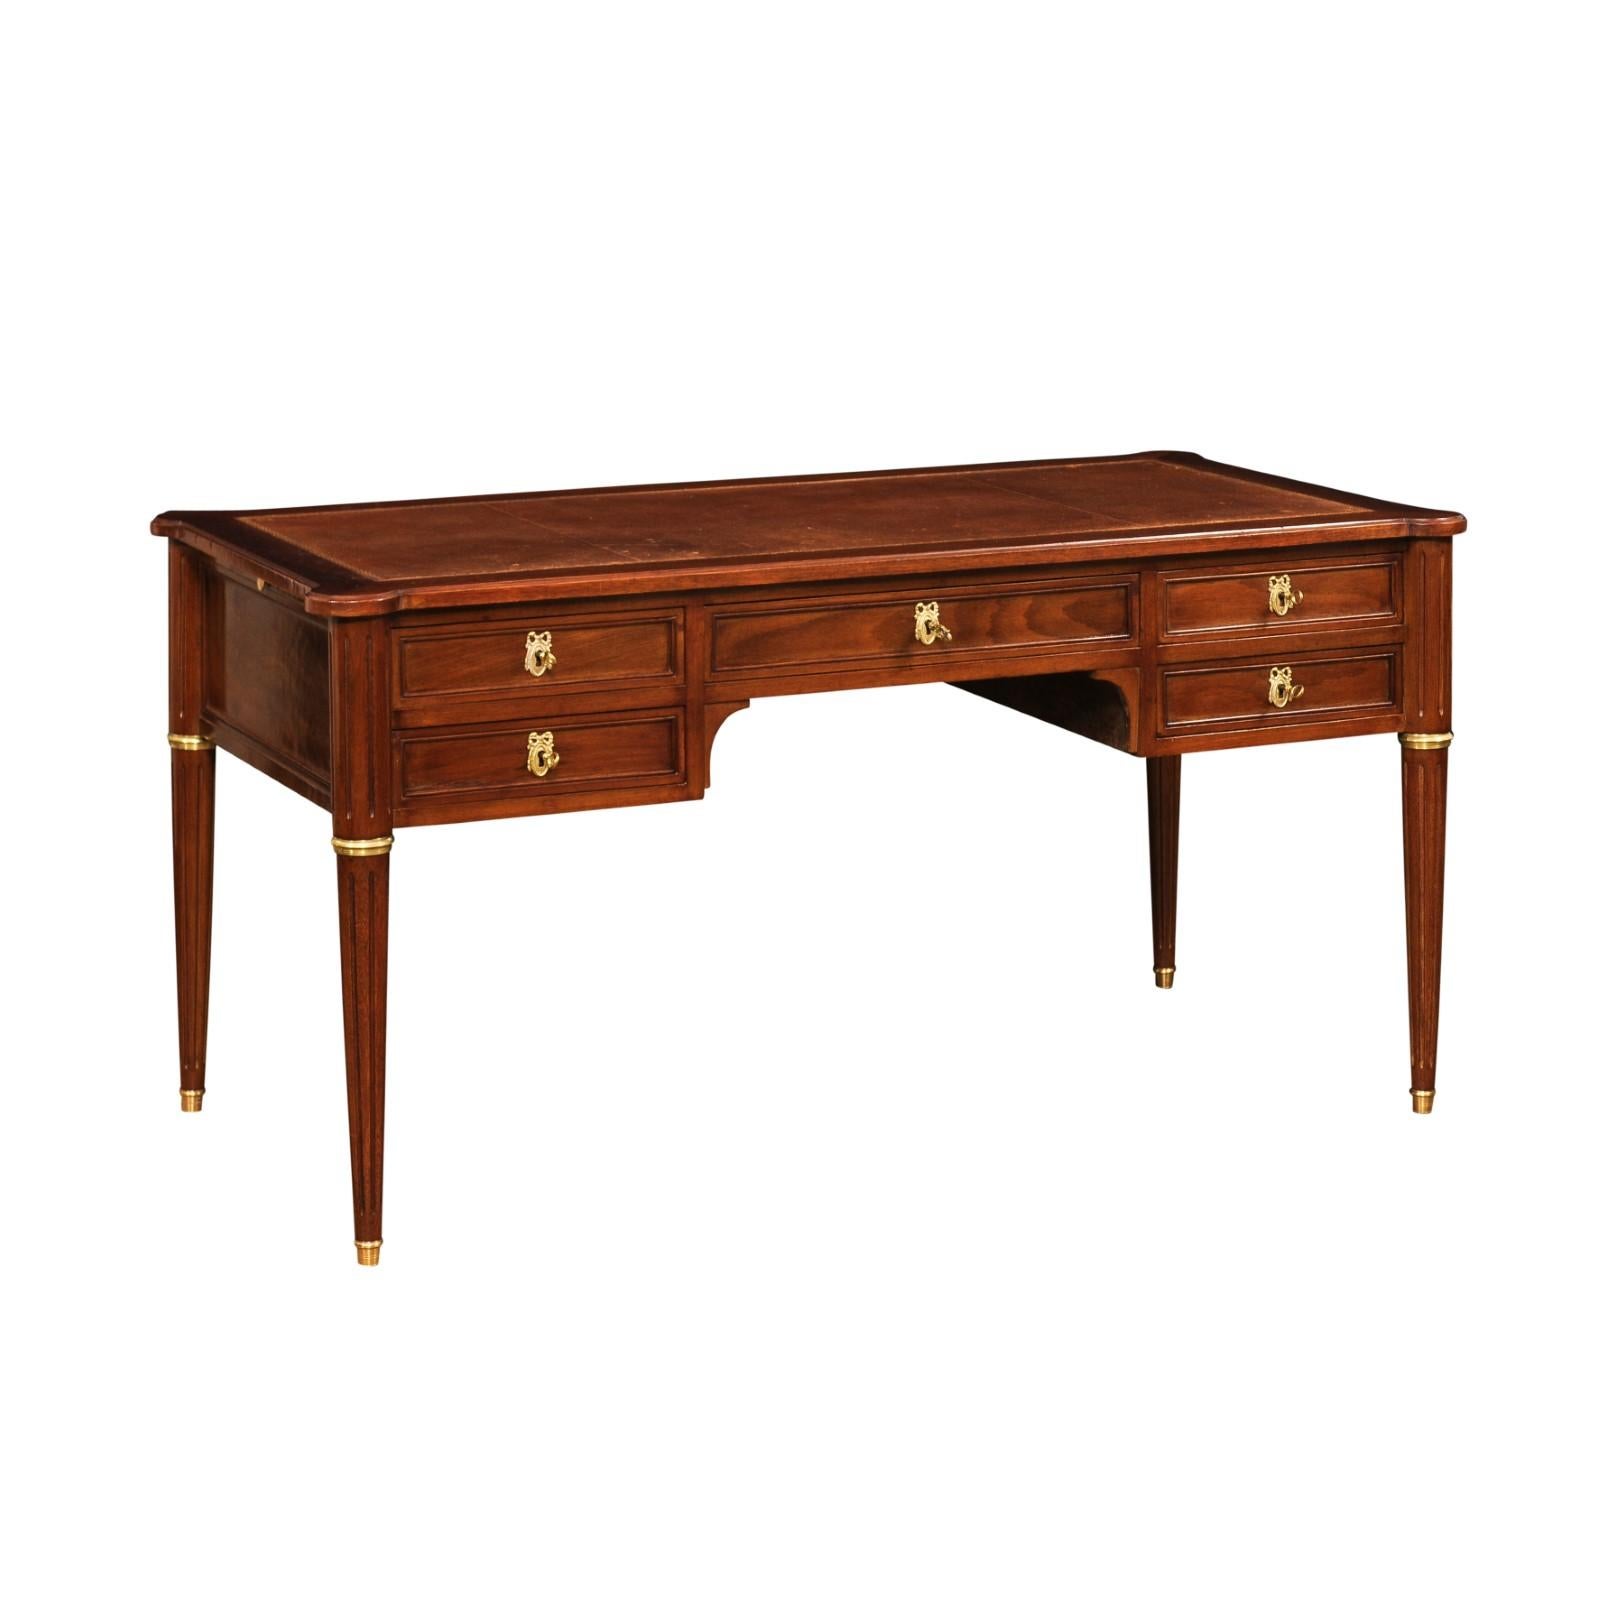 A large Louis XVI style mahogany two-sided bureau plat desk from the 20th century with five frontal drawers, tan leather top and pull outs. Created in France during the 20th century, this mahogany desk features a tan colored leather top with rounded